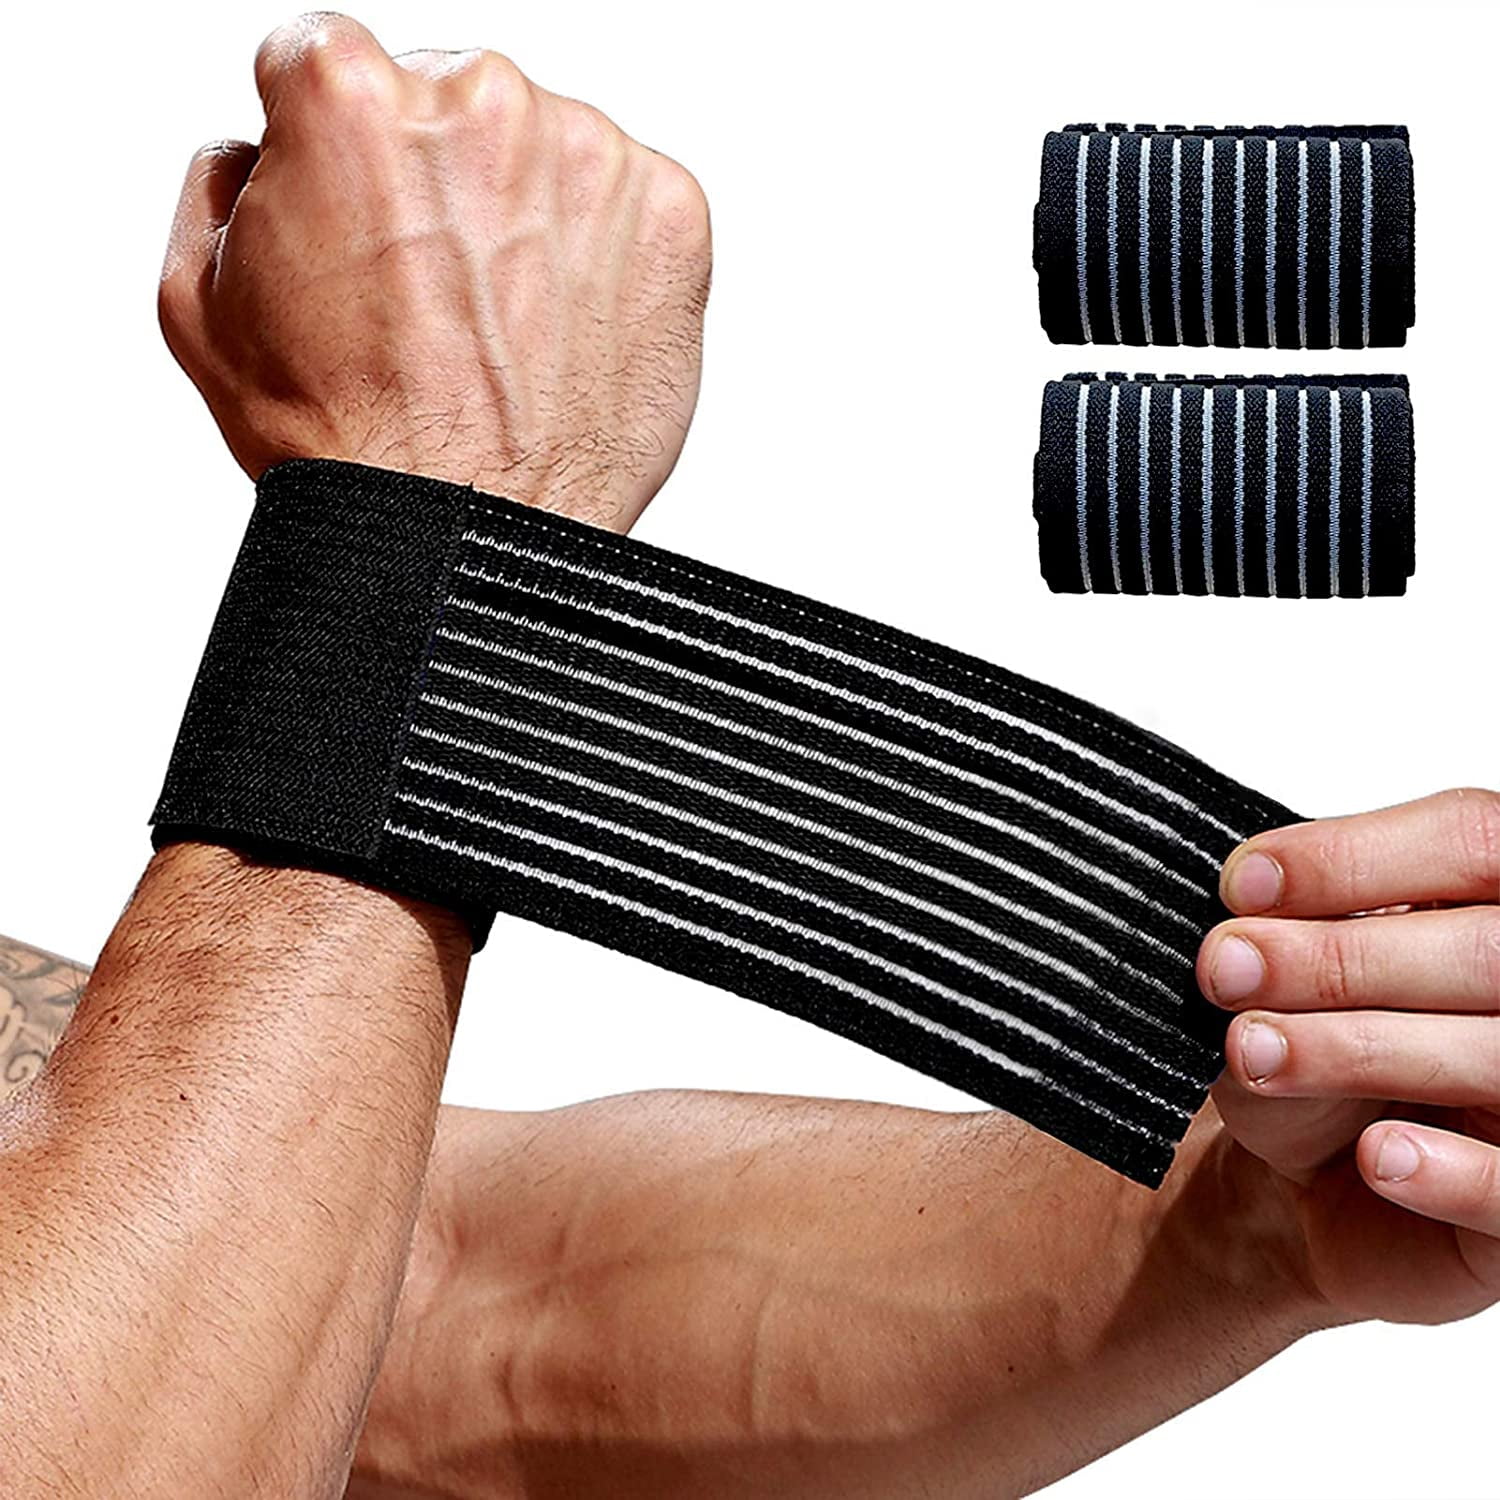 Black, L 2 Pack Wrist Brace Carpal Tunnel Wrist Wraps Support Sleeves for Work Fitness Weightlifting Sprains Tendonitis Pain Relief Breathable Wristbands Compression Wrist Strap 